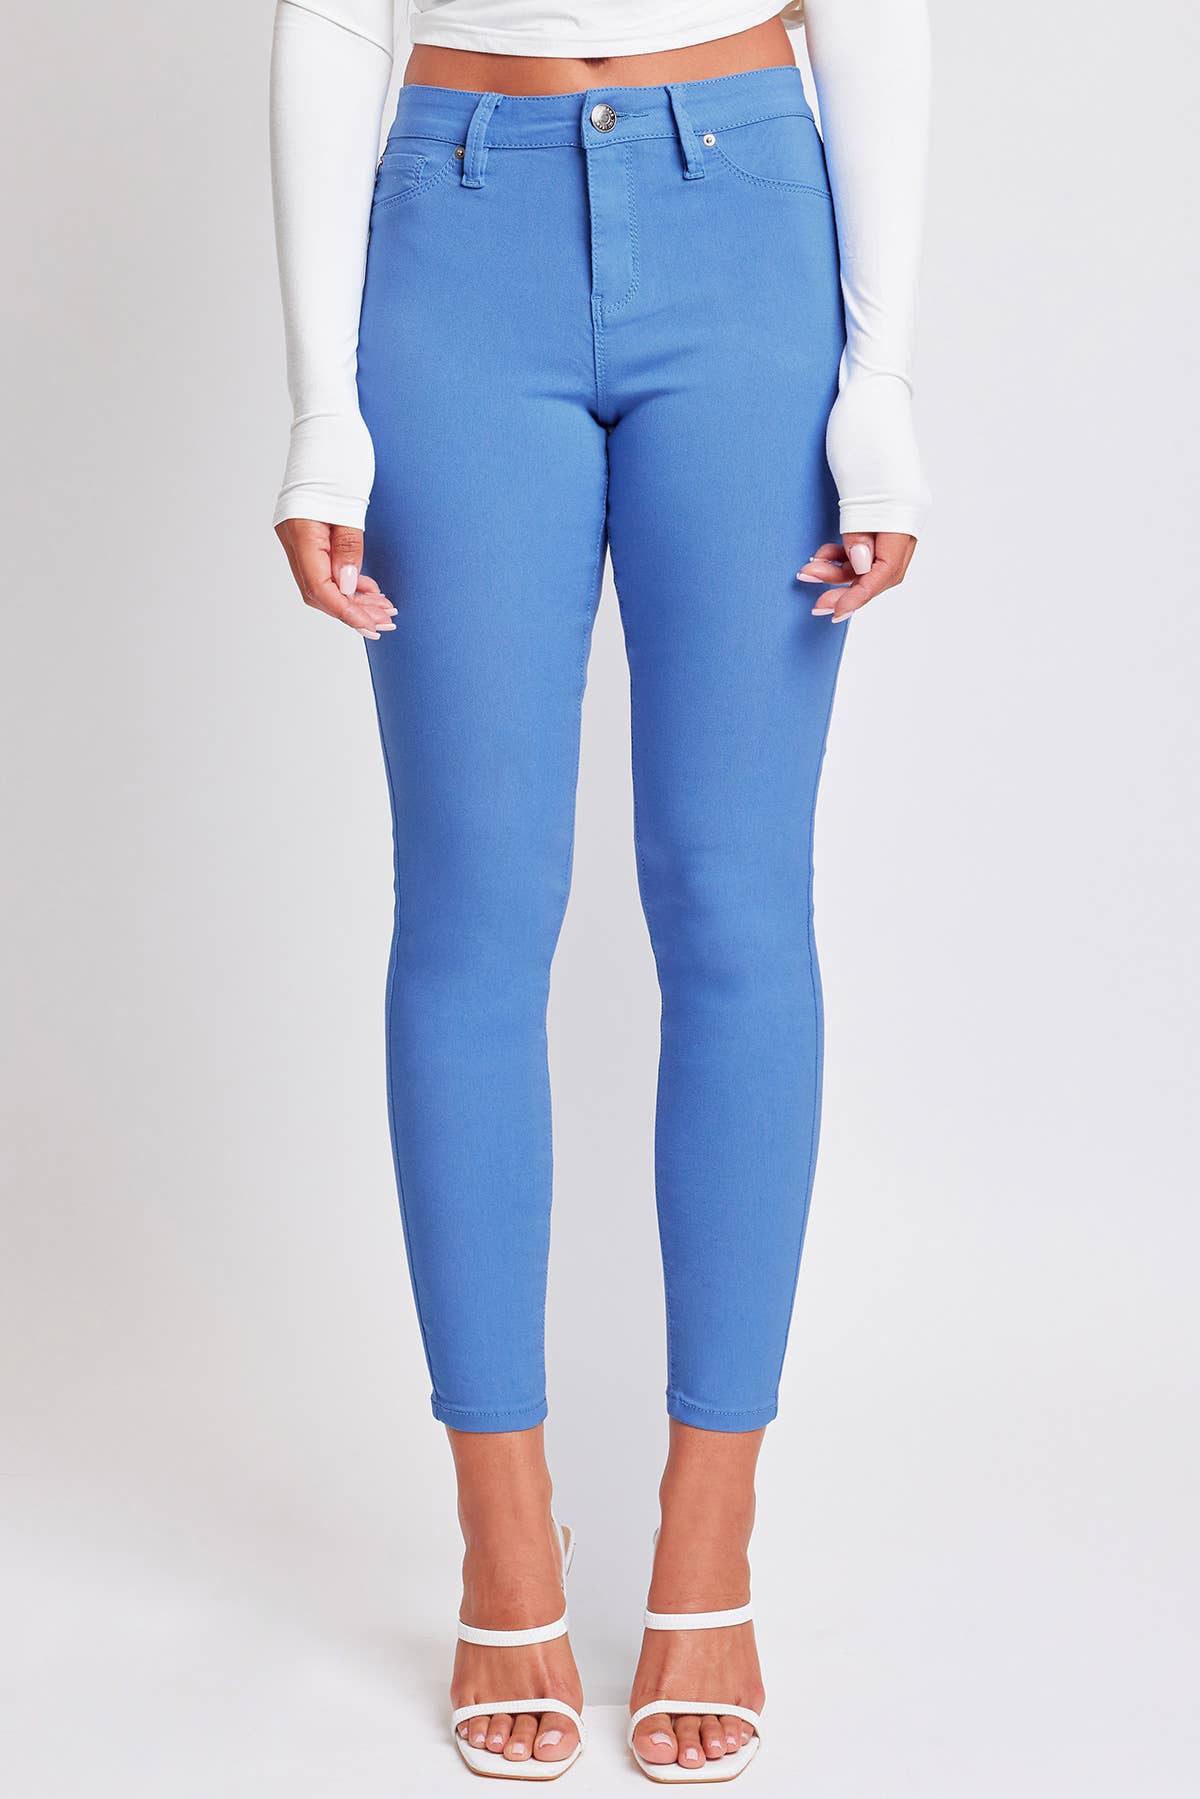 Hyperstretch Mid-Rise Skinny Jean: L / Junior / Shell Pink